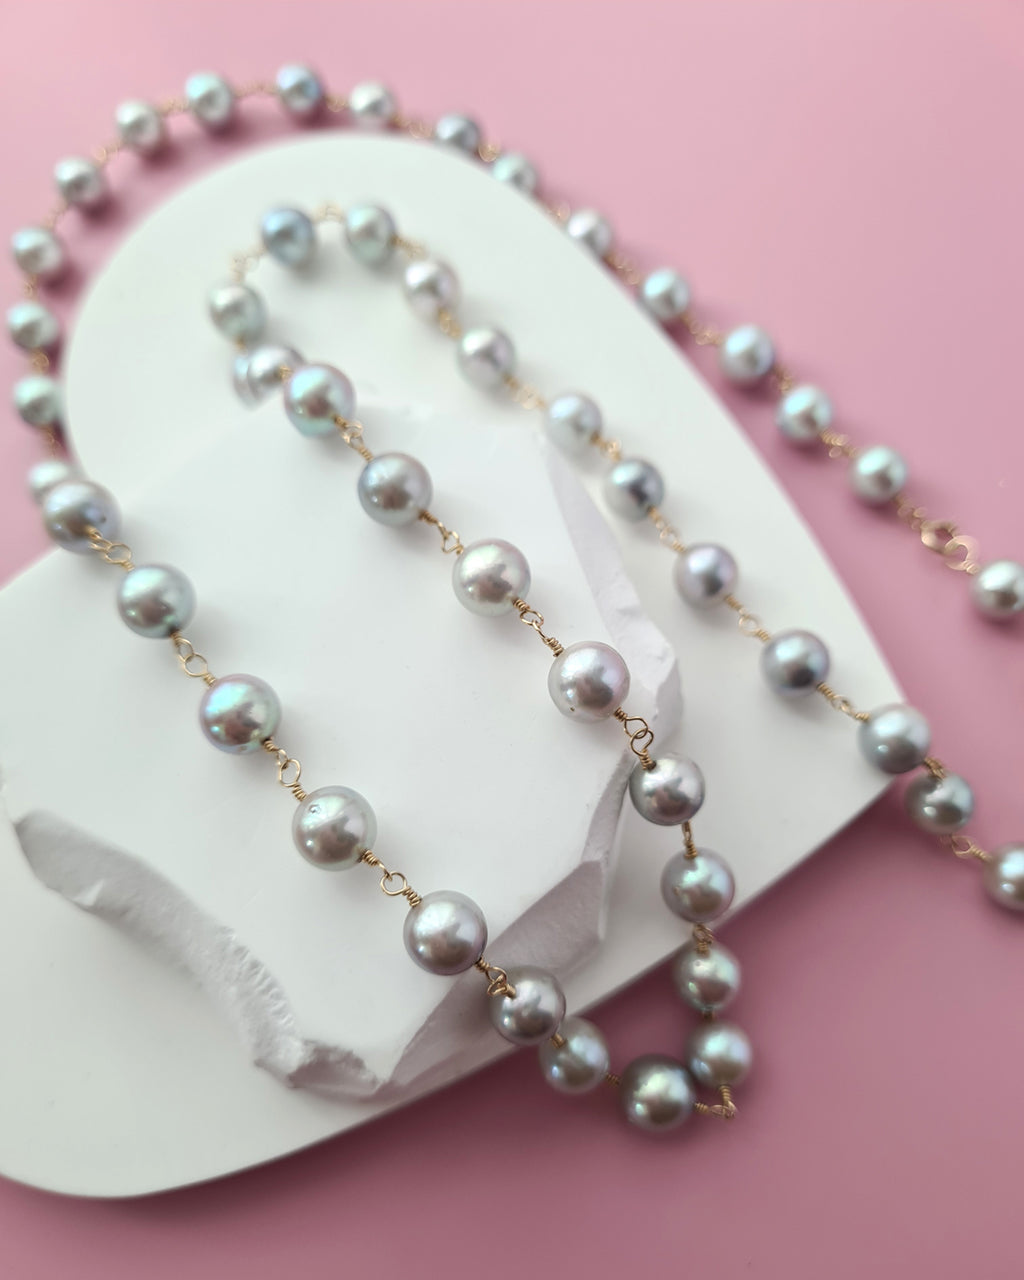 Silver Blue Akoya Pearl Extra-Long Necklace - 8mm-9mm, 14k Gold Filled Pearl Jewelry